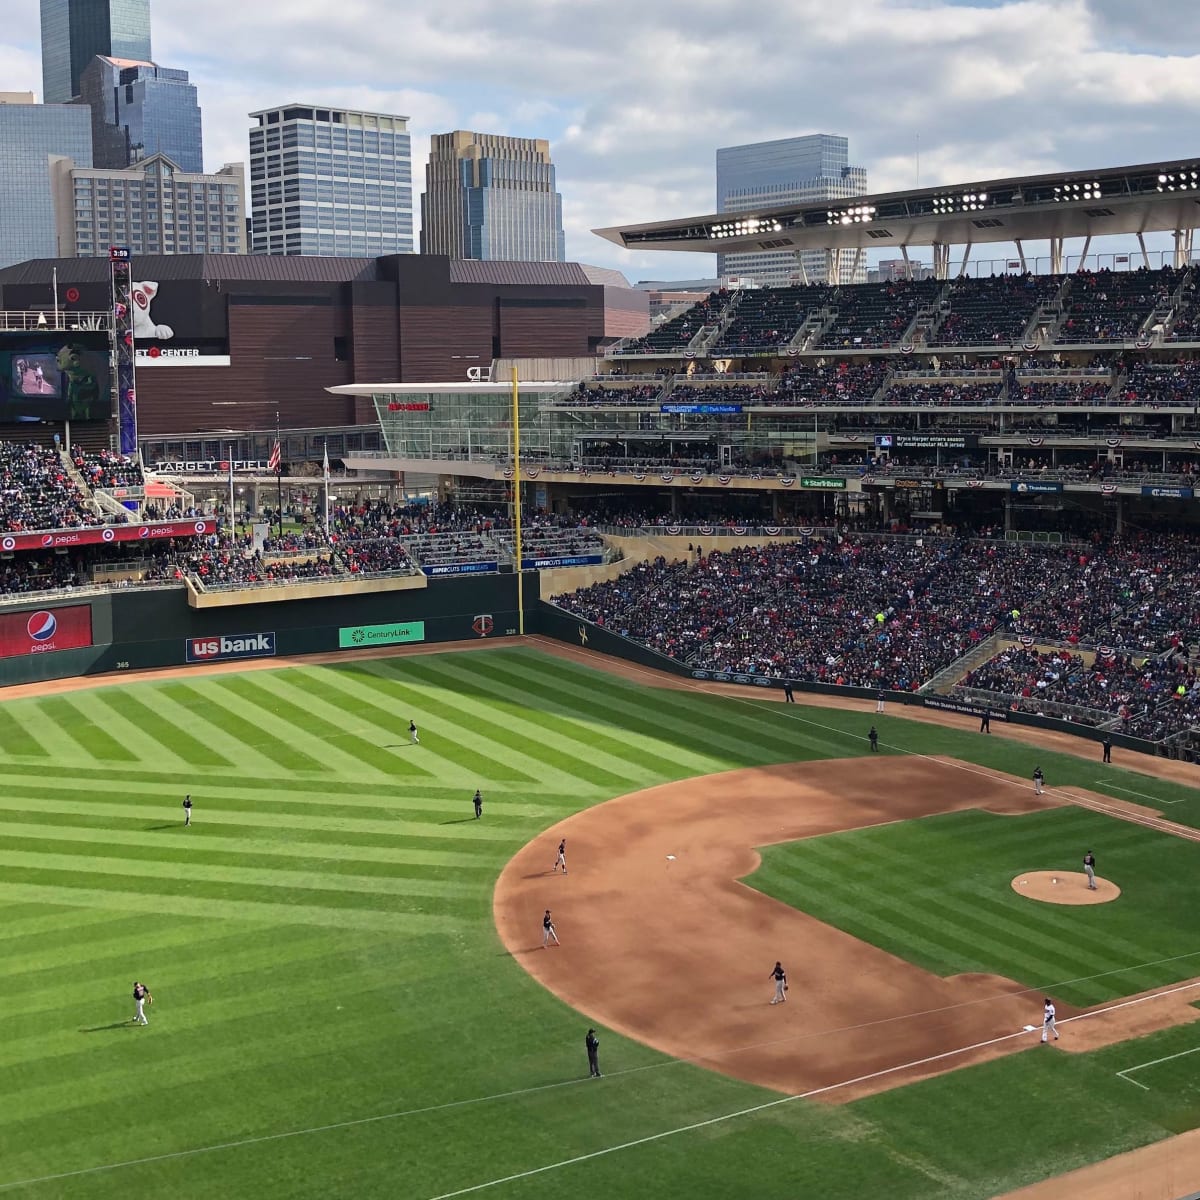 Twins offer $5 ticket deal to help 'restore home field advantage